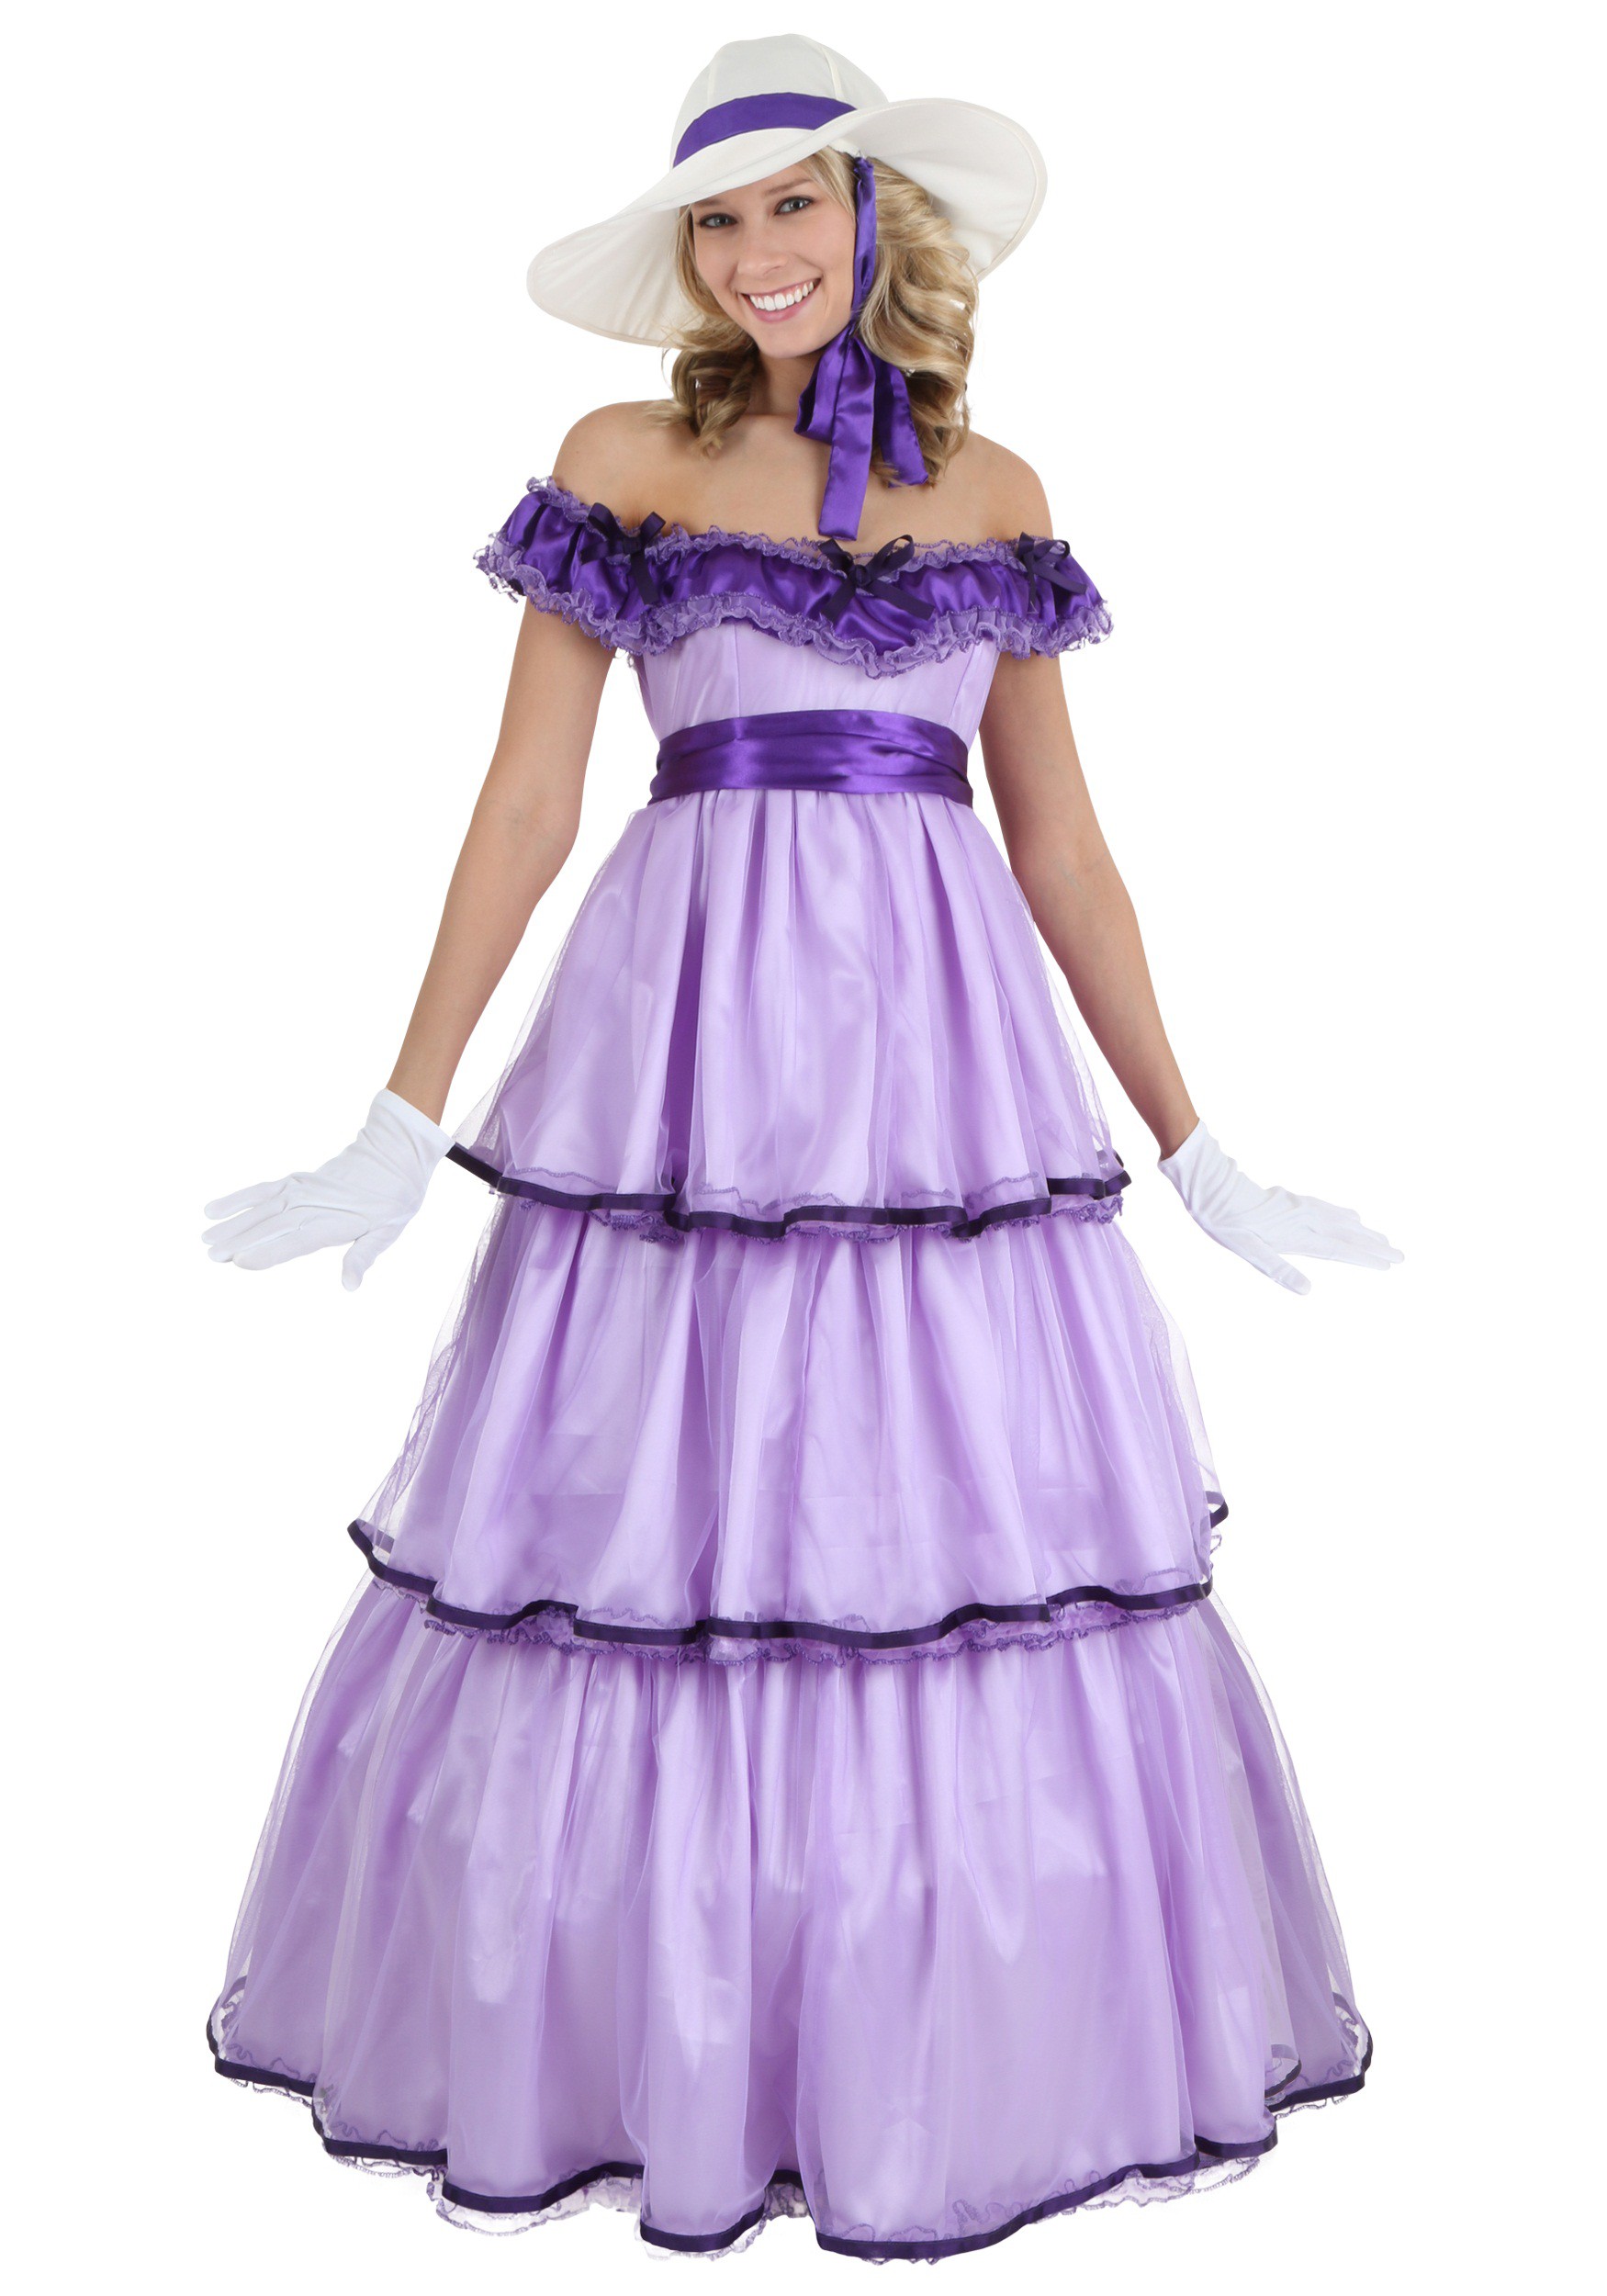 Plus Size Deluxe Southern Belle Costume Dress for Women